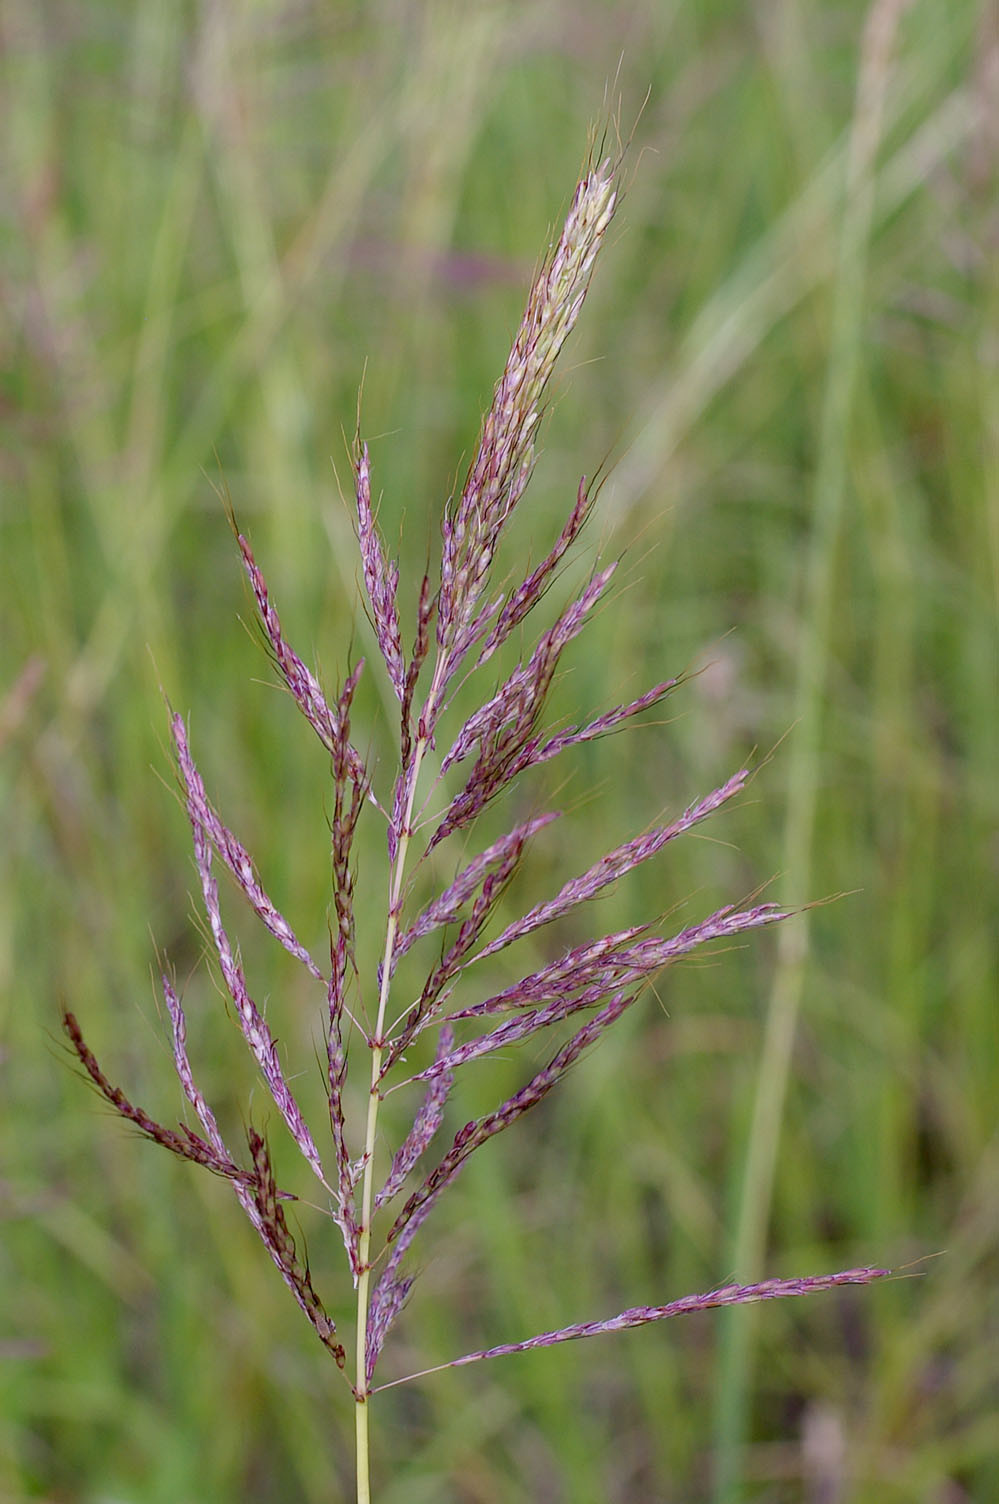 Fig. 9. Inflorescence of Bothriochloa bladhii, note the simple undivided primary branches (PHOTO: RJCumming d18998a).